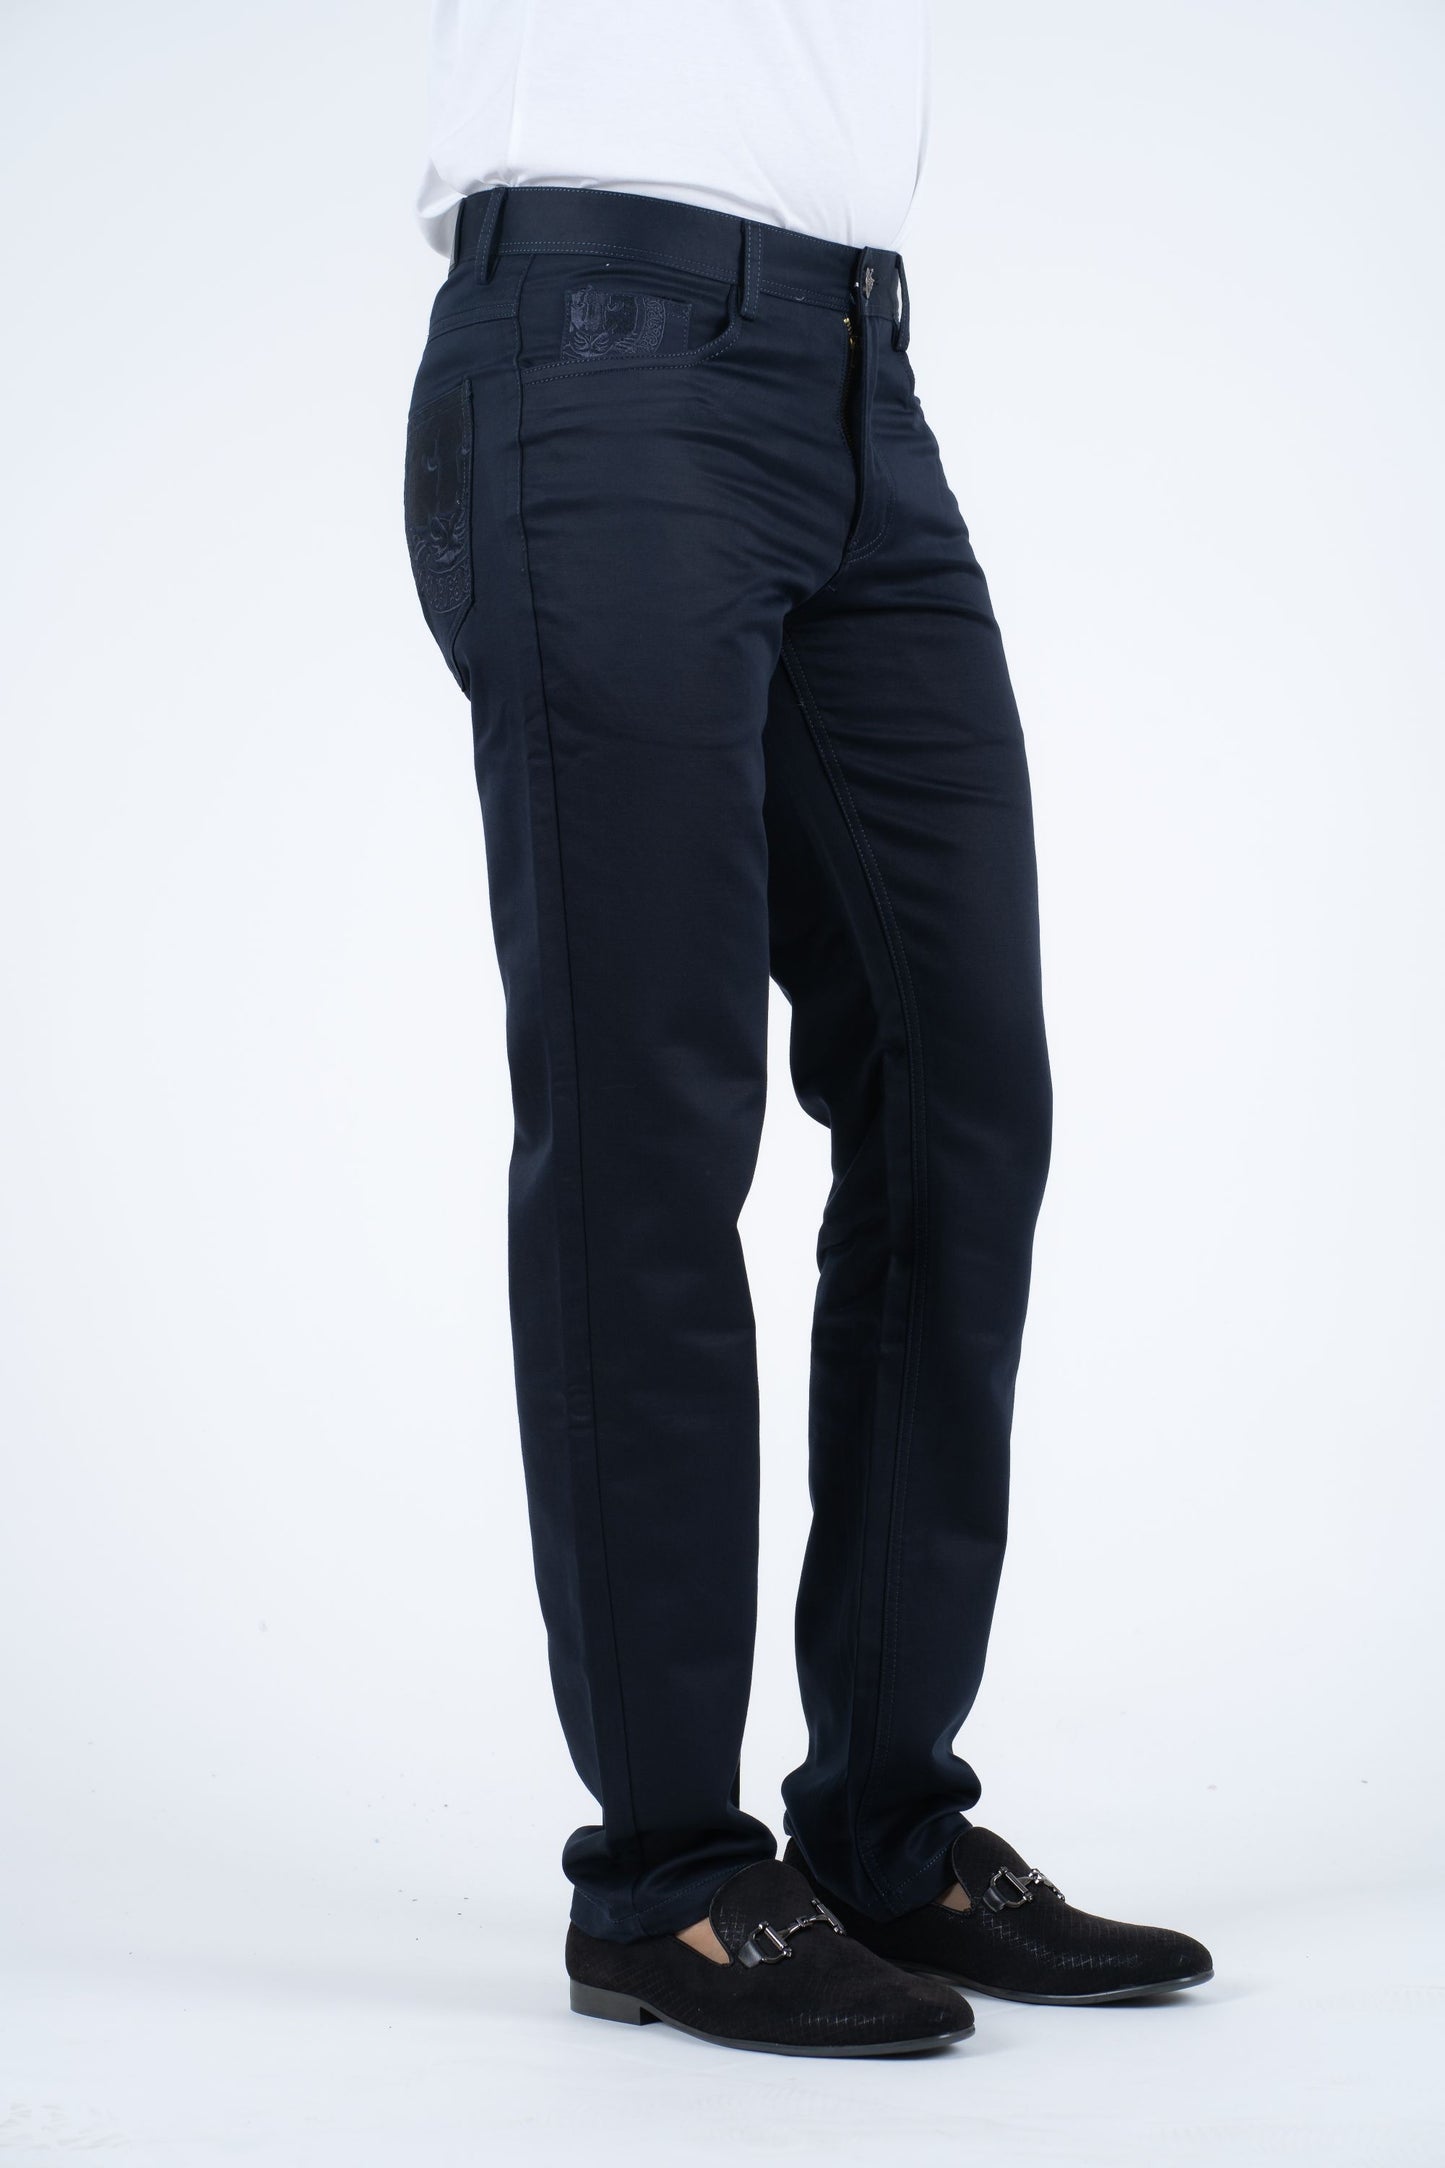 Slade Men's Navy Relaxed Fit Stretch Pants